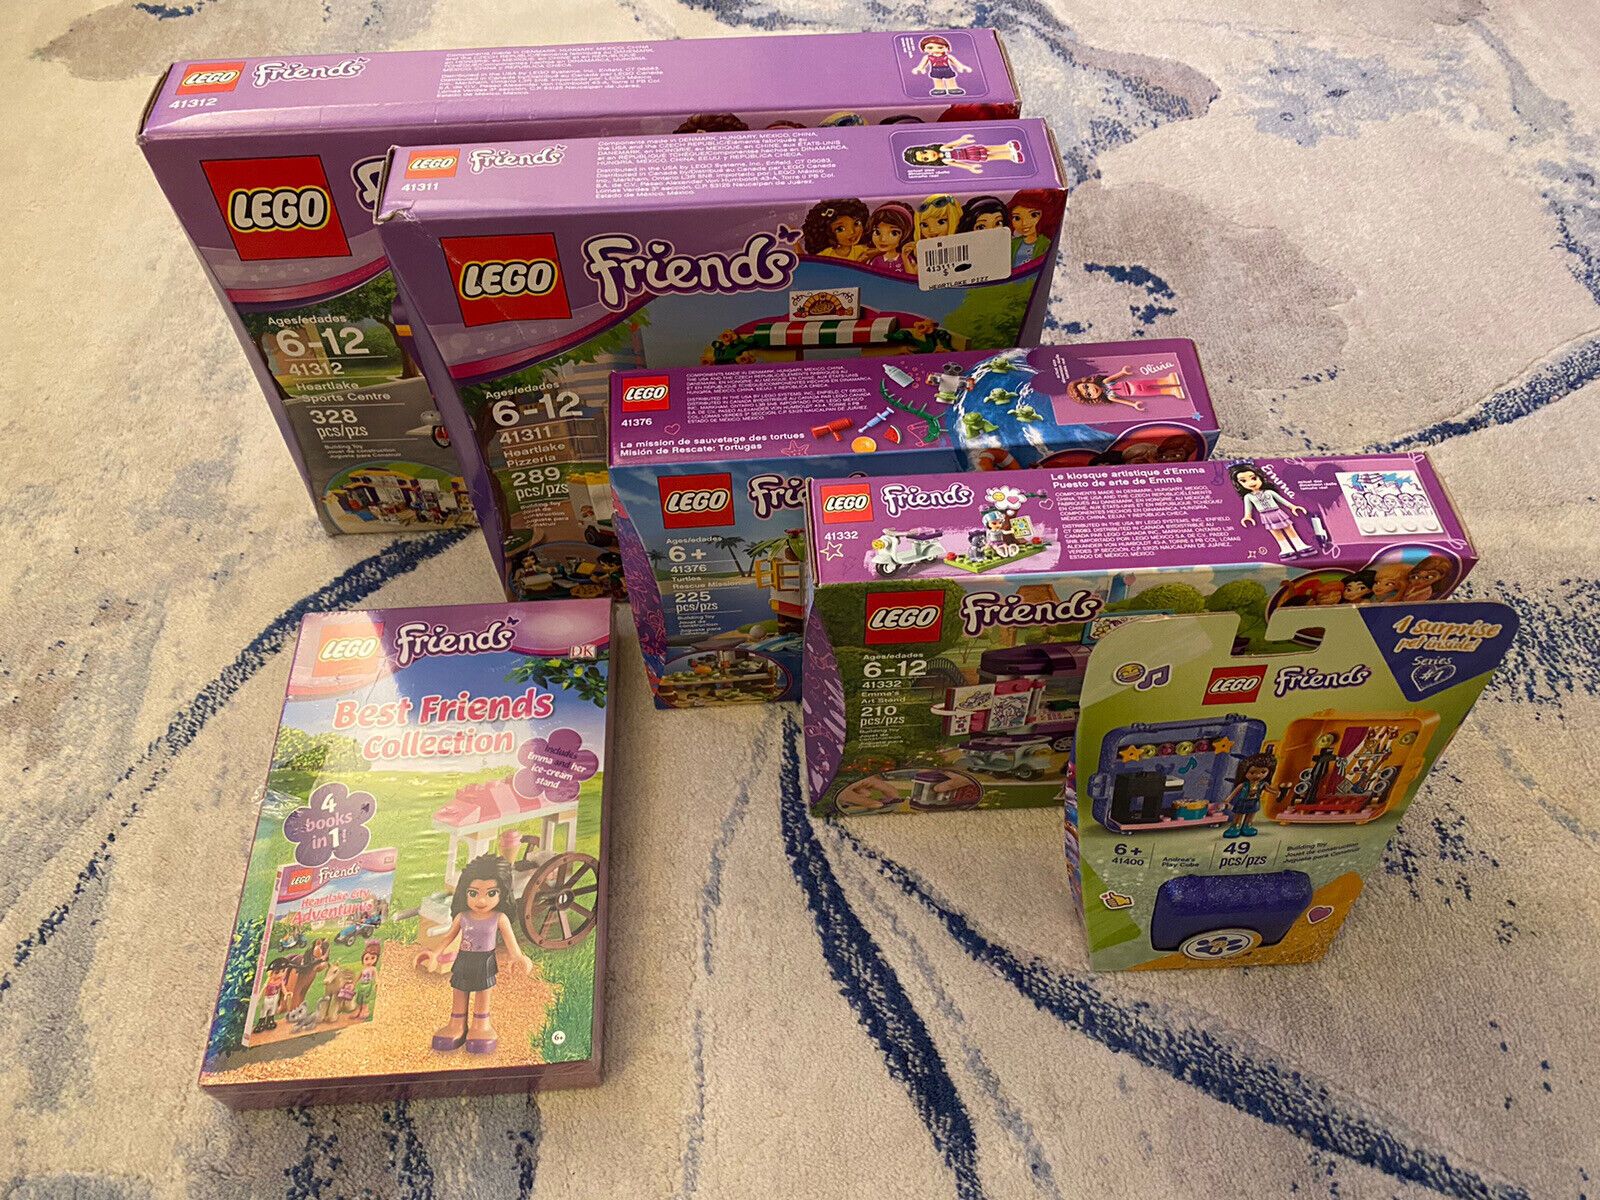 LEGO Friends Sets (41311, 41312, 41332, 41376, 41400) New & Sealed, READ!